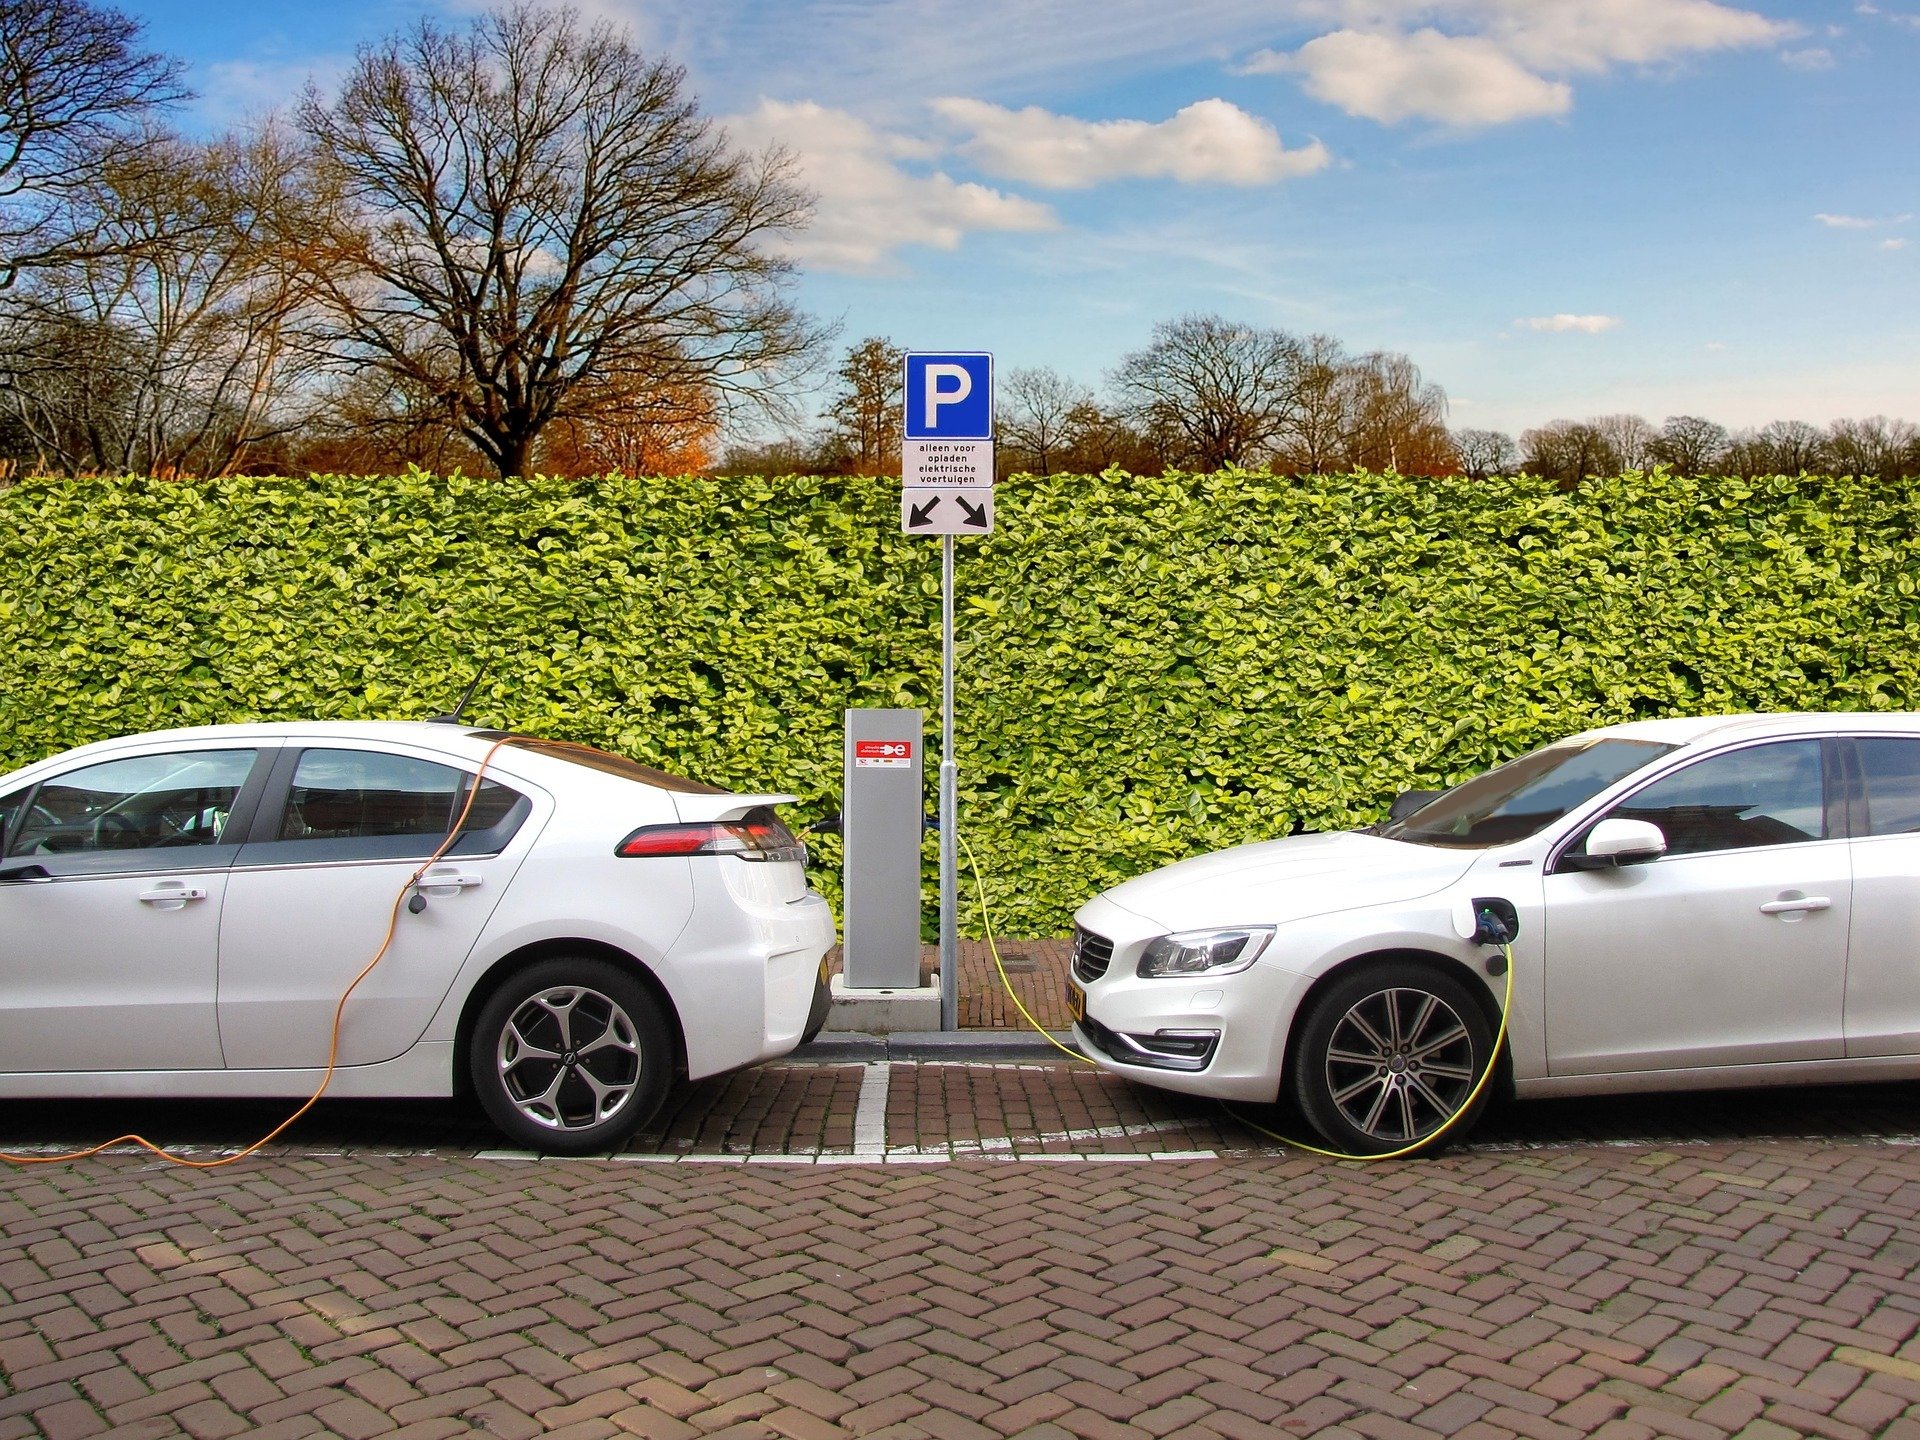 Why your taxes shouldn't pay for electric charging stations.